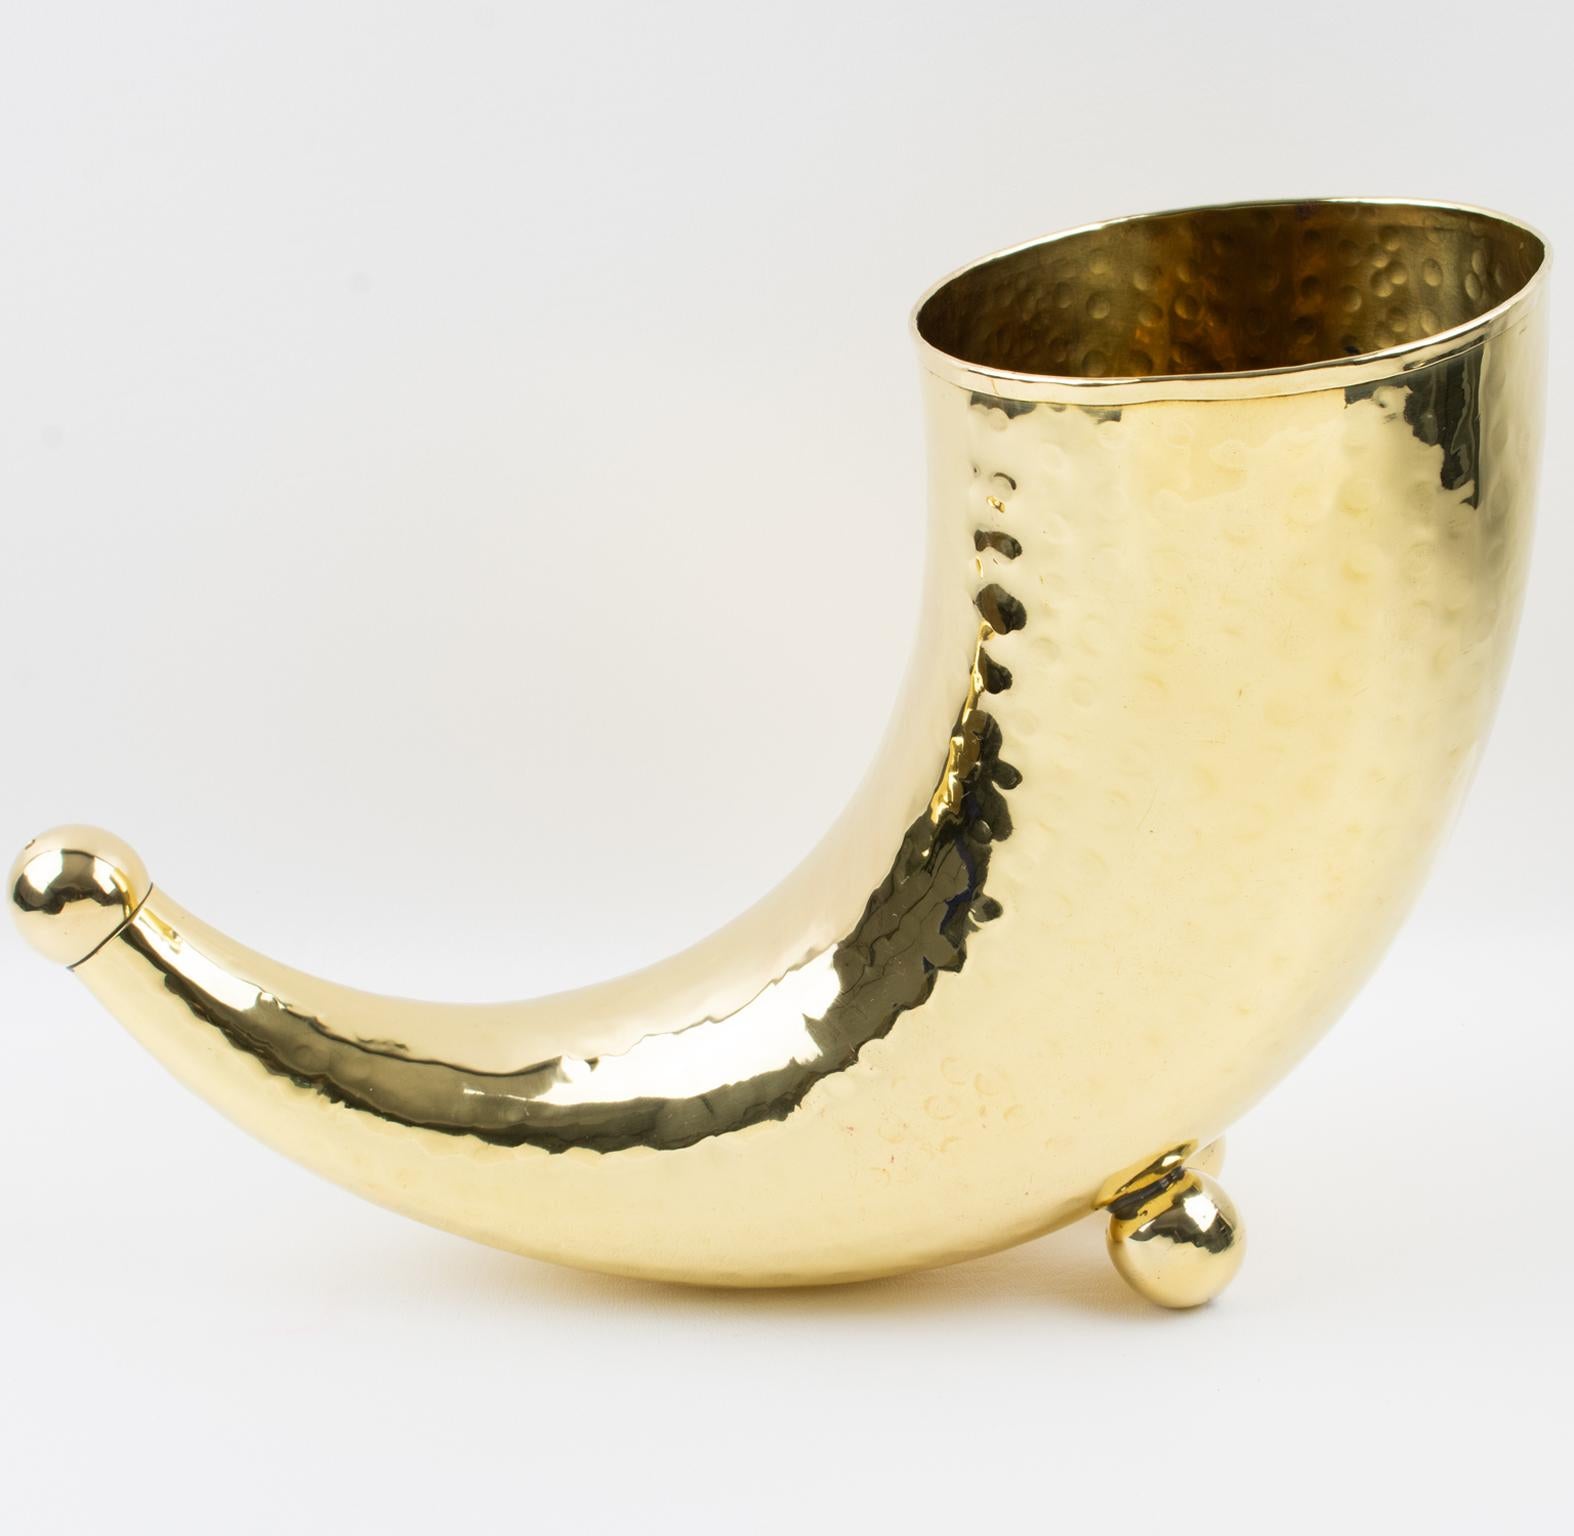 This stylish modernist brass wine cooler or vase features an ultra-chic versatile use with a whimsical minimalist horn of plenty with bead feet and high glossy metal with a slightly hammered finish. Lots of character, bold lines, and flawless